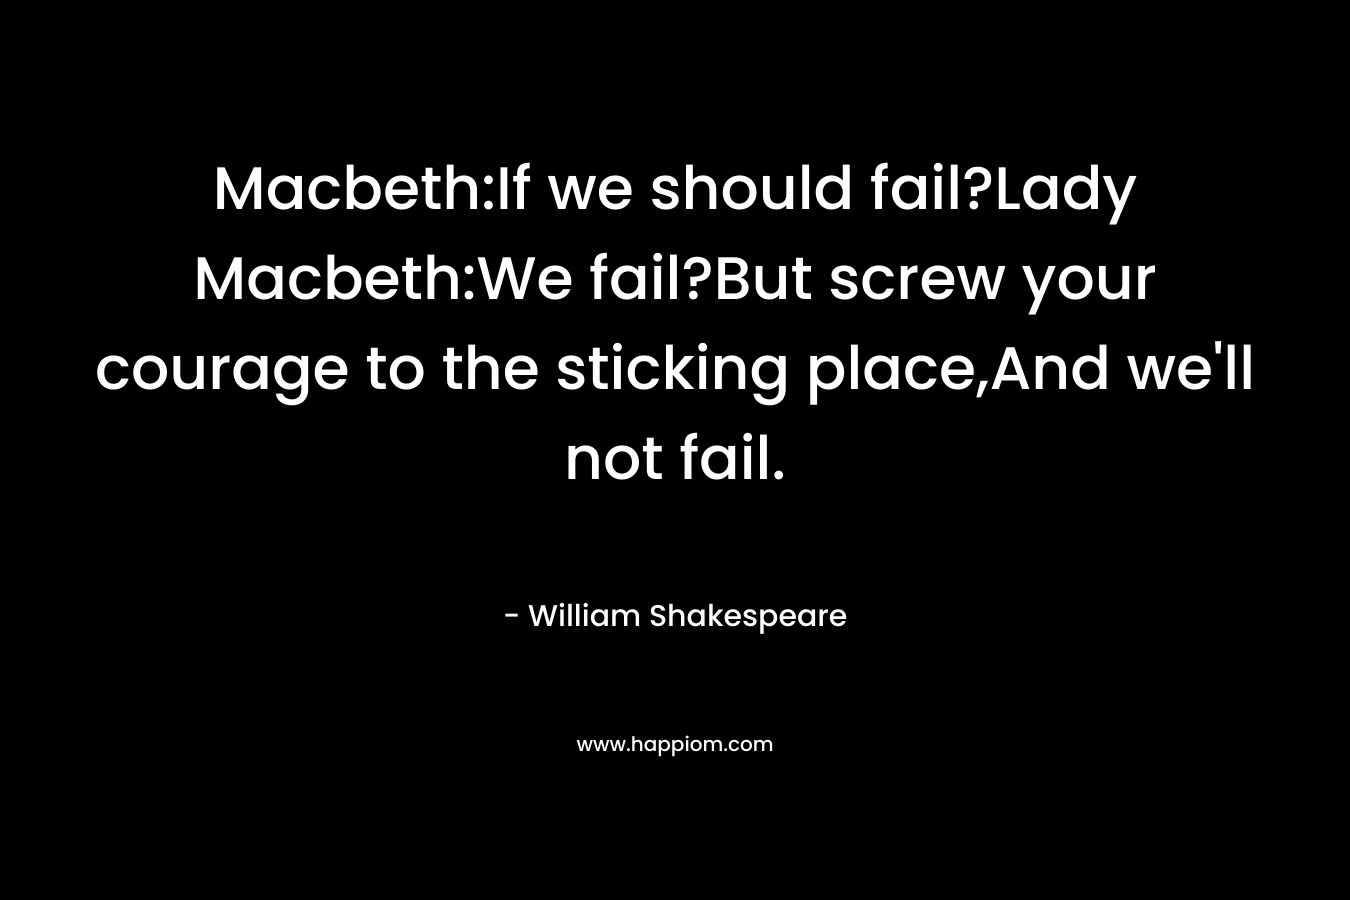 Macbeth:If we should fail?Lady Macbeth:We fail?But screw your courage to the sticking place,And we'll not fail.